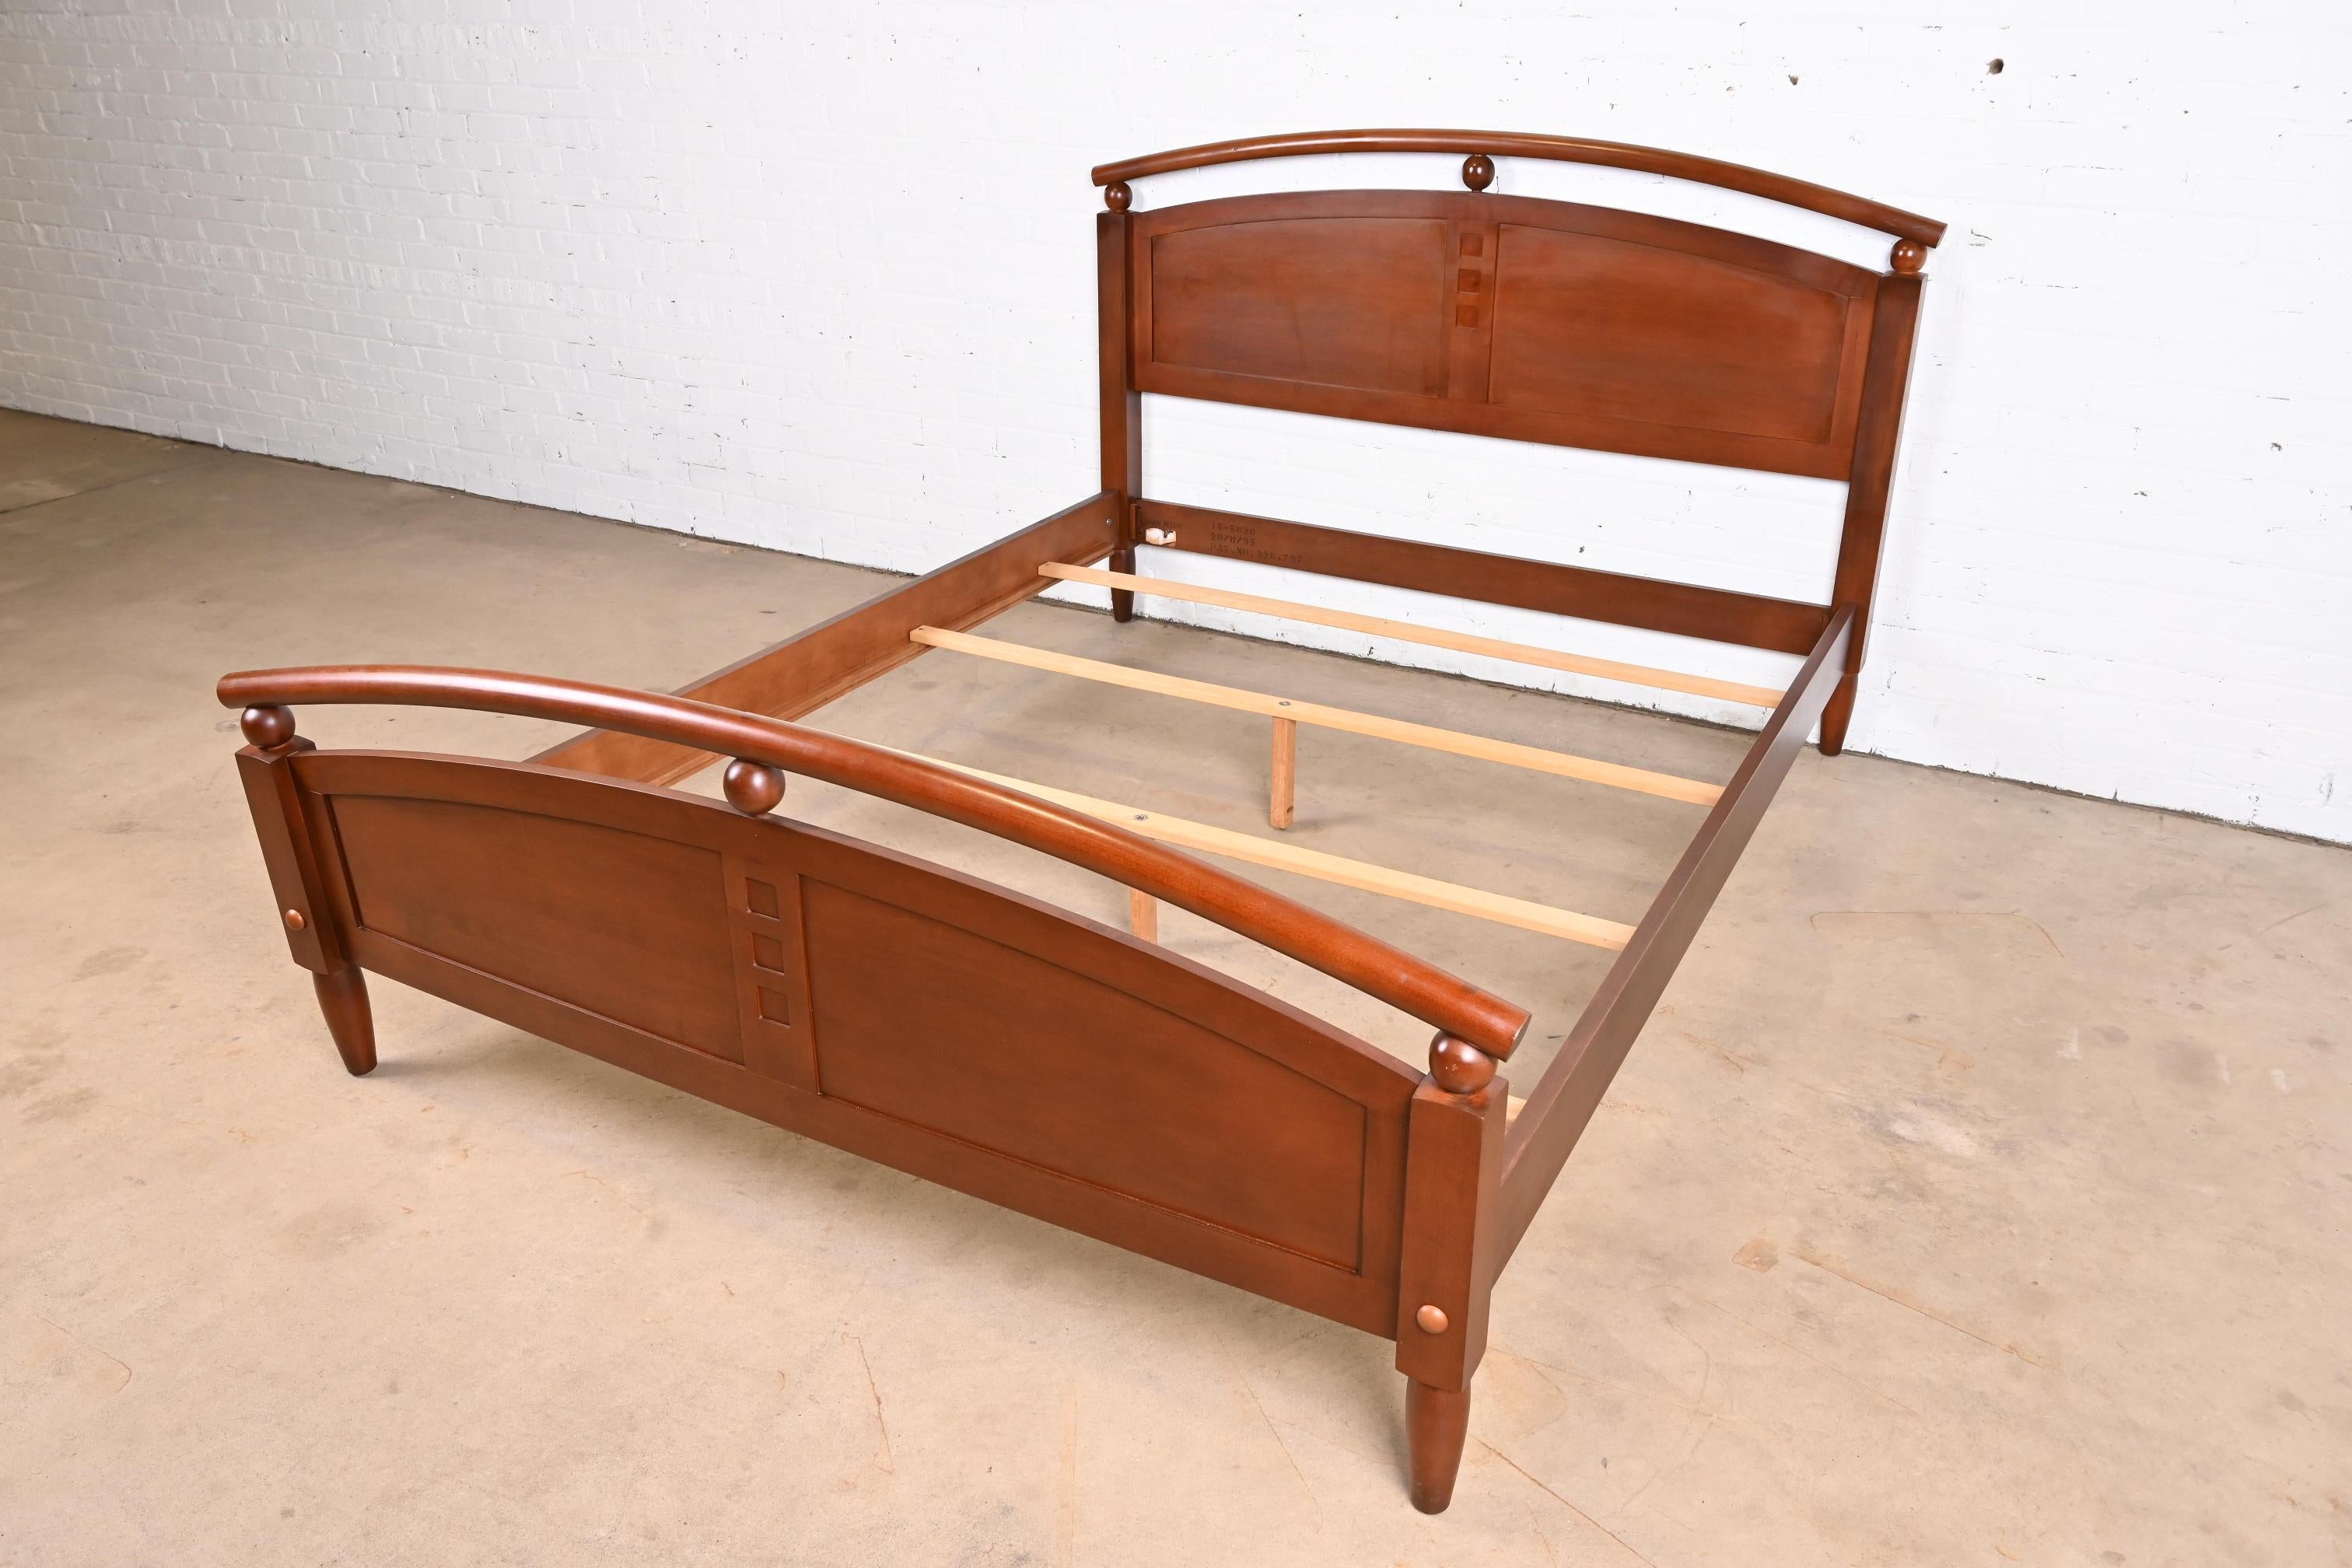 20th Century Ethan Allen American Dimensions Modern Cherry Wood Queen Size Bed